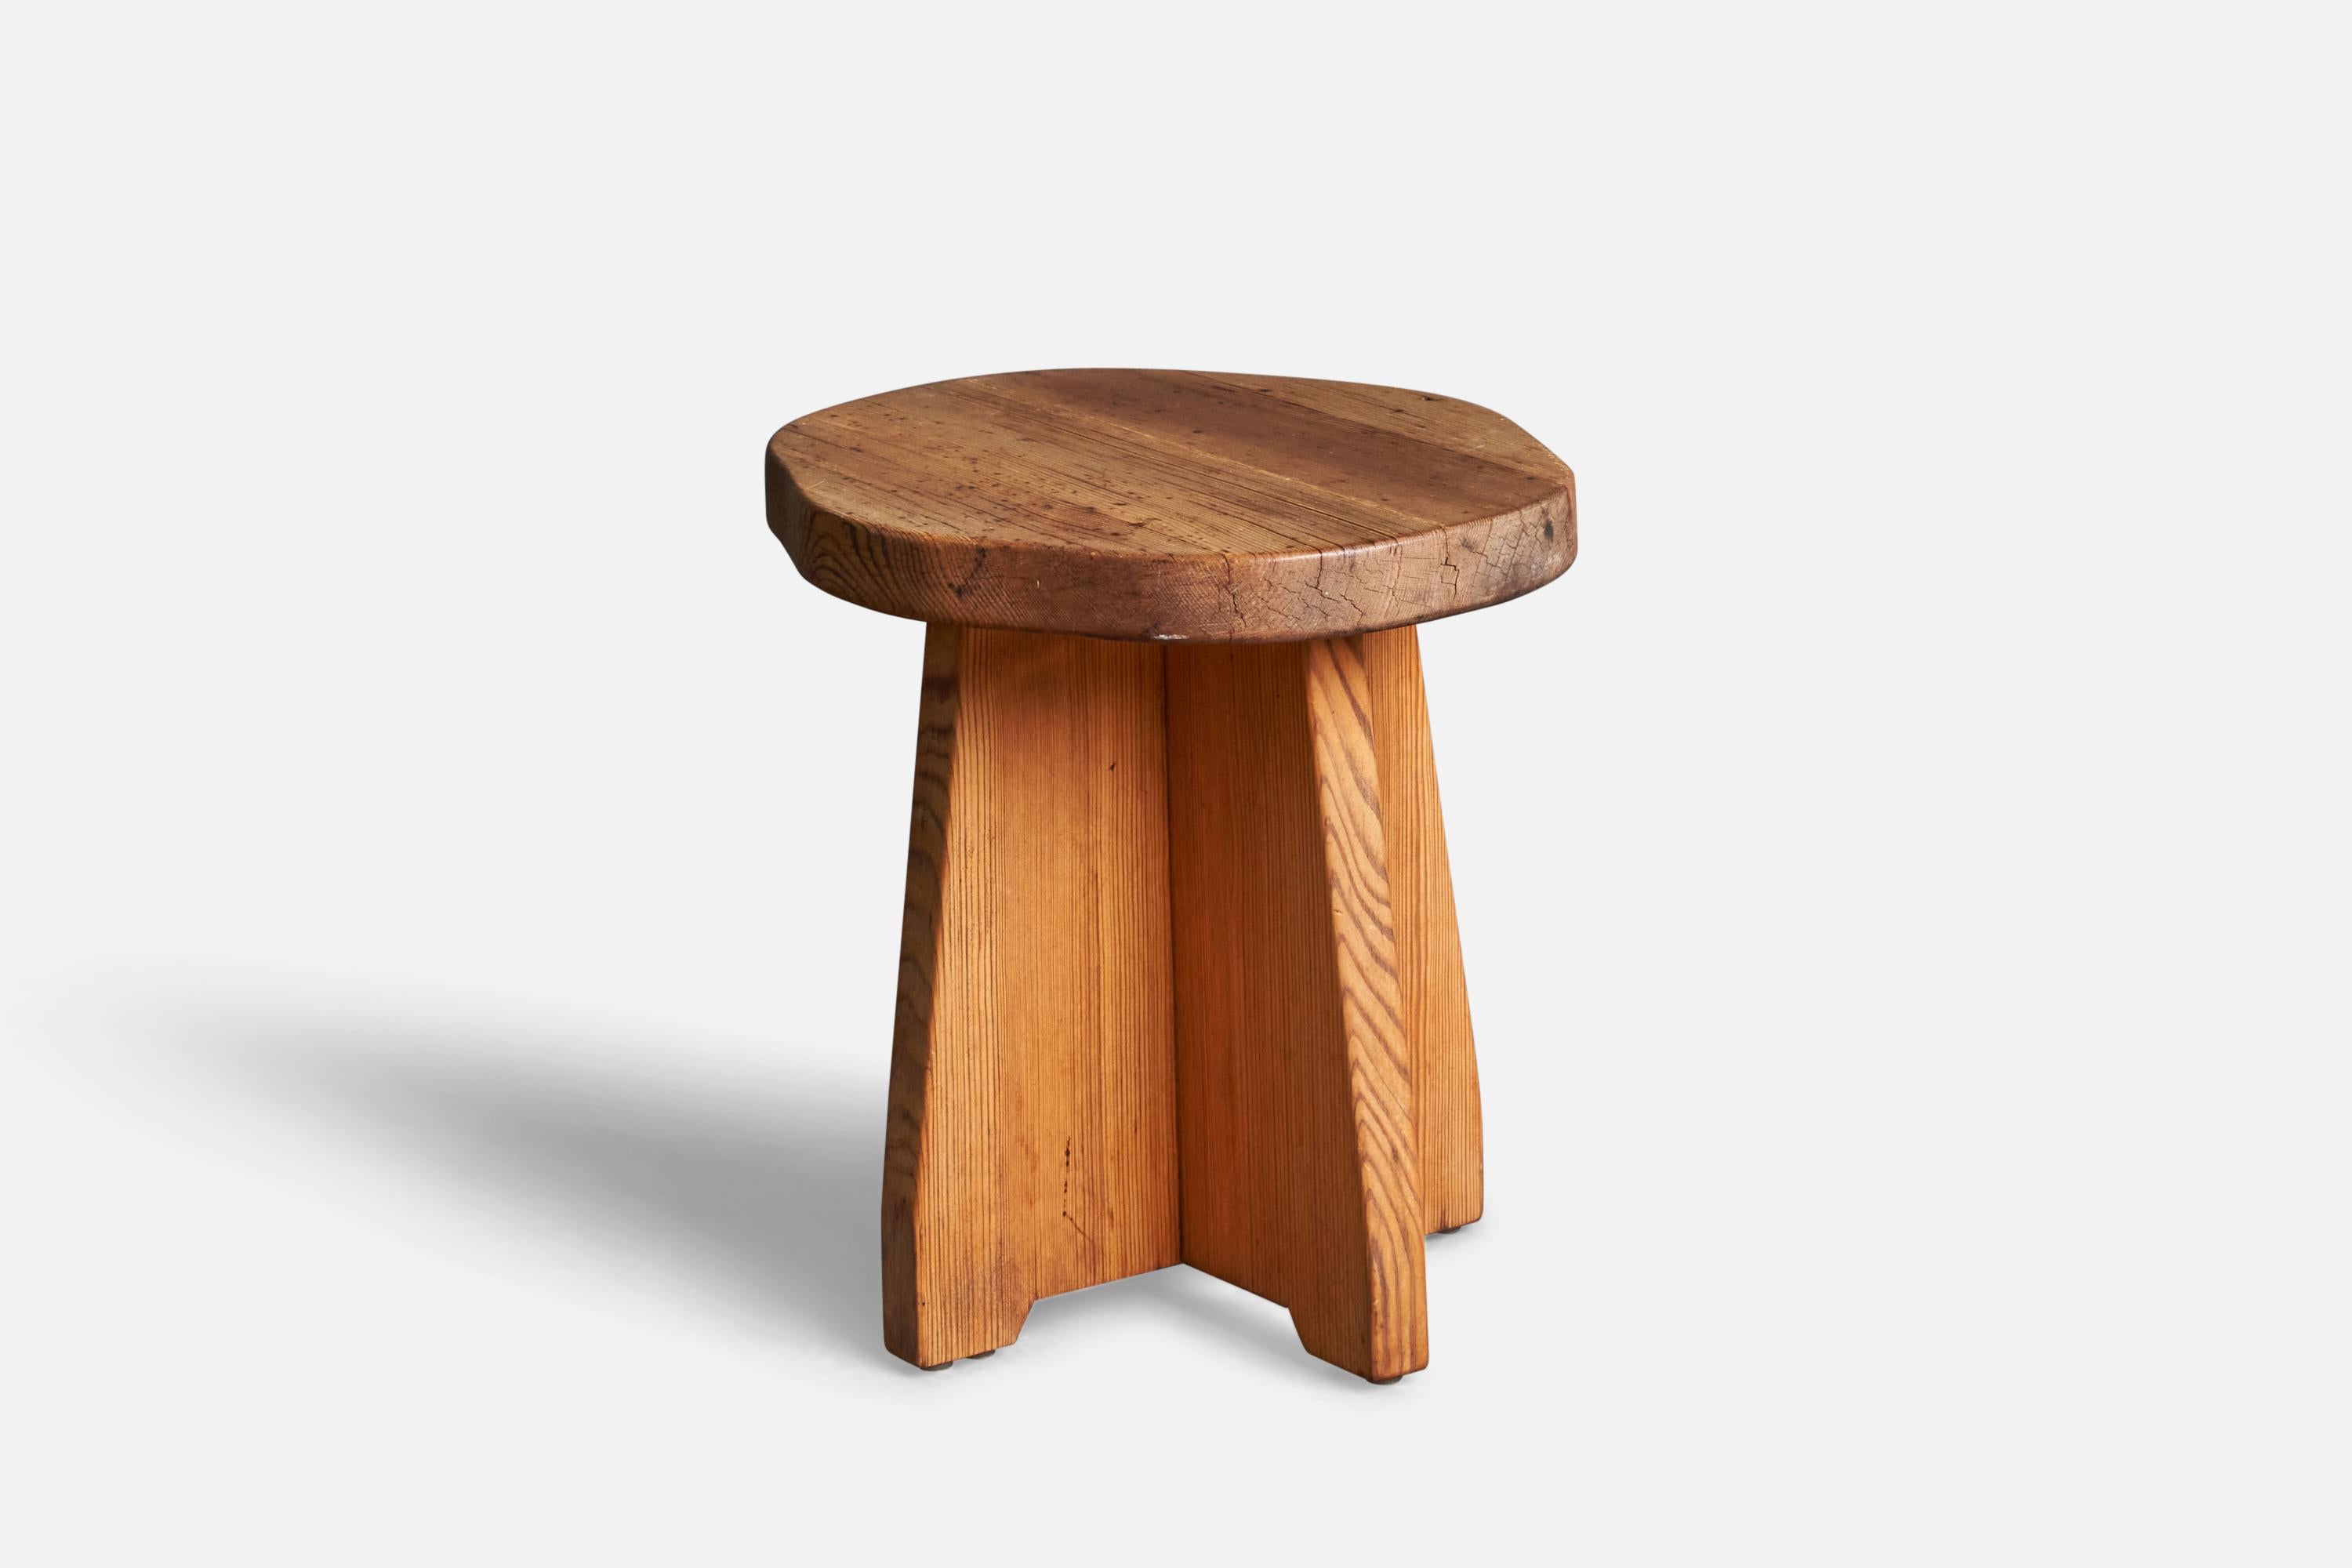 A solid pine stool, designed by David Rosén and produced by Nordiska Kompaniet, c. 1940s.